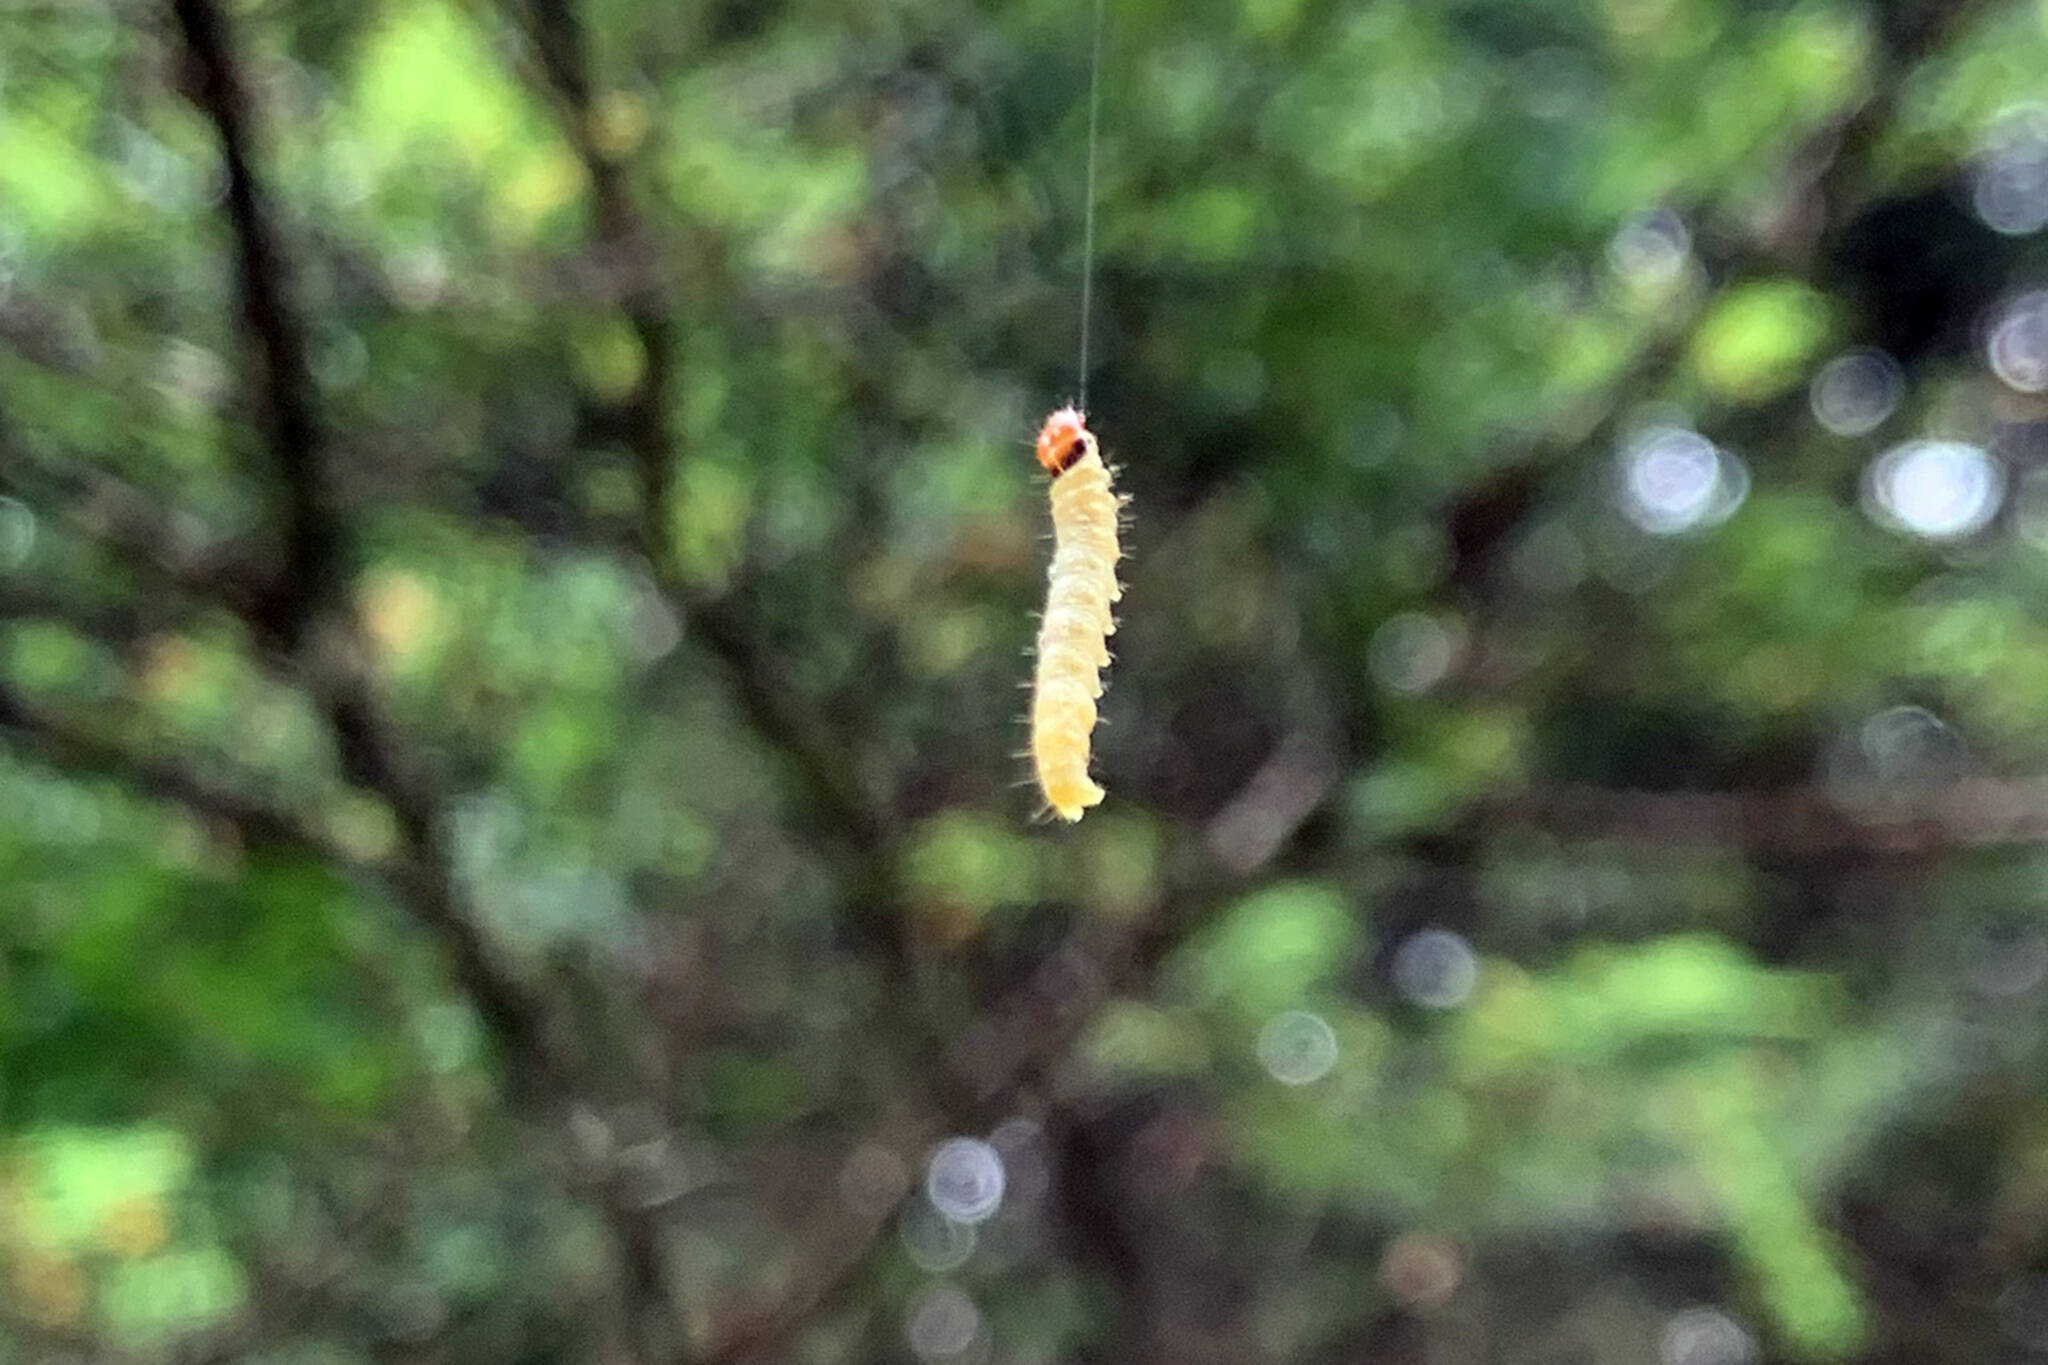 This photo shows a western black-headed budworm caterpillar. The caterpillars are wasteful feeders that typically do not eat all of a needle. This leads to discoloration that can lead people to believe trees are dying. However, Elizabeth Graham, entomologist for the U.S. Forest Service, said trees typically survive budworm outbreaks. (Courtesy Photo / U.S. Forest Service Alaska Region)